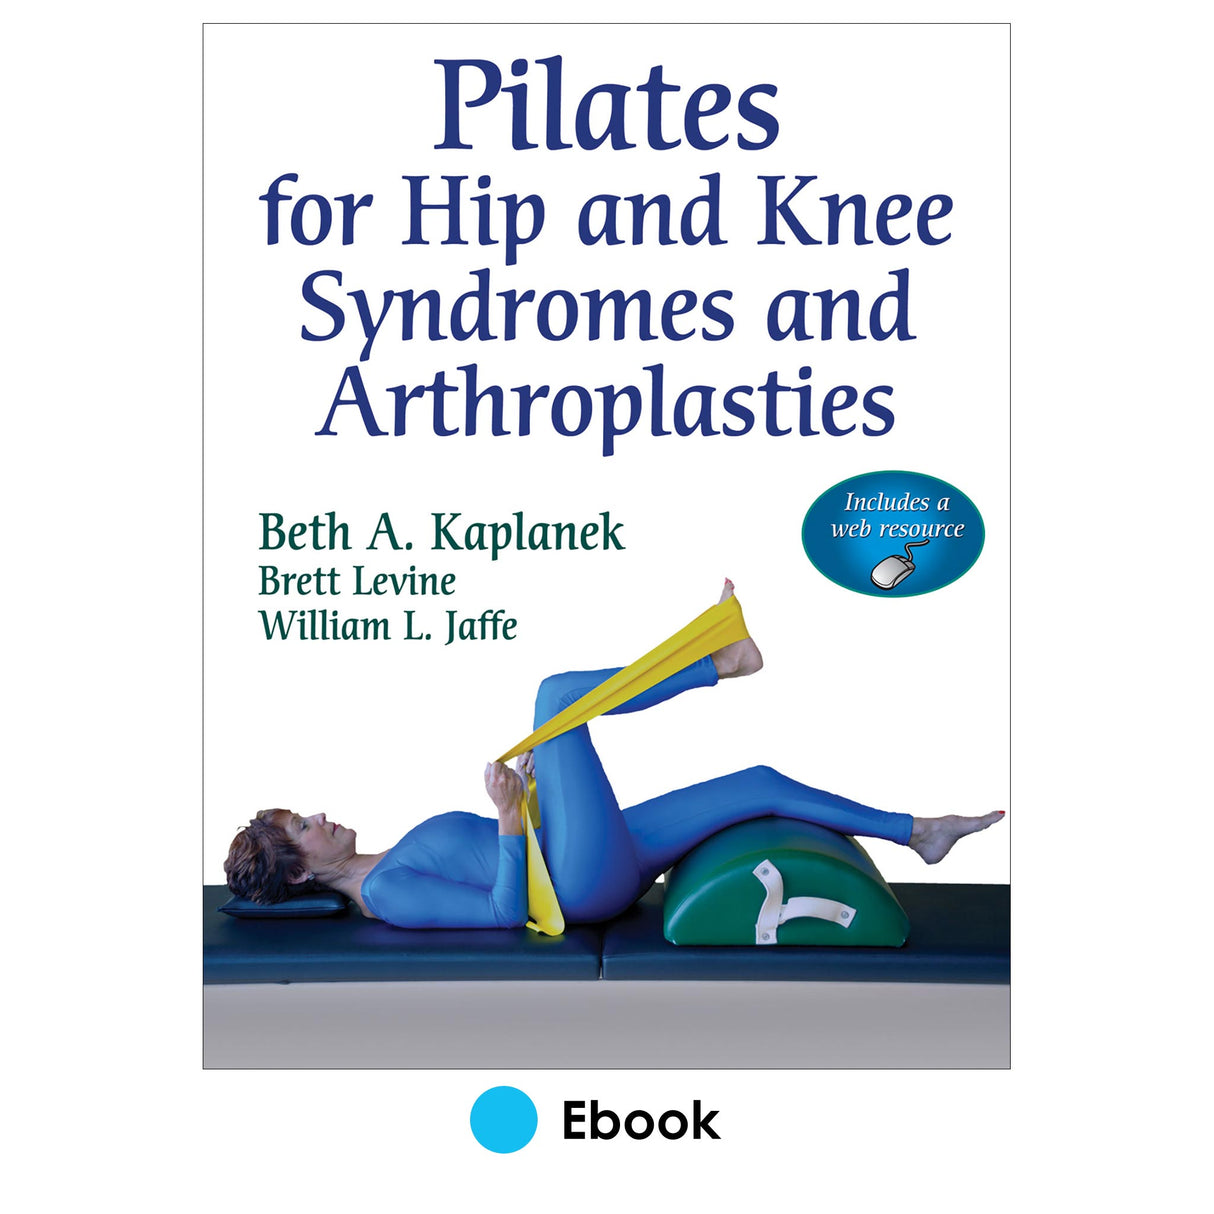 Pilates for Hip and Knee Syndromes and Arthroplasties PDF